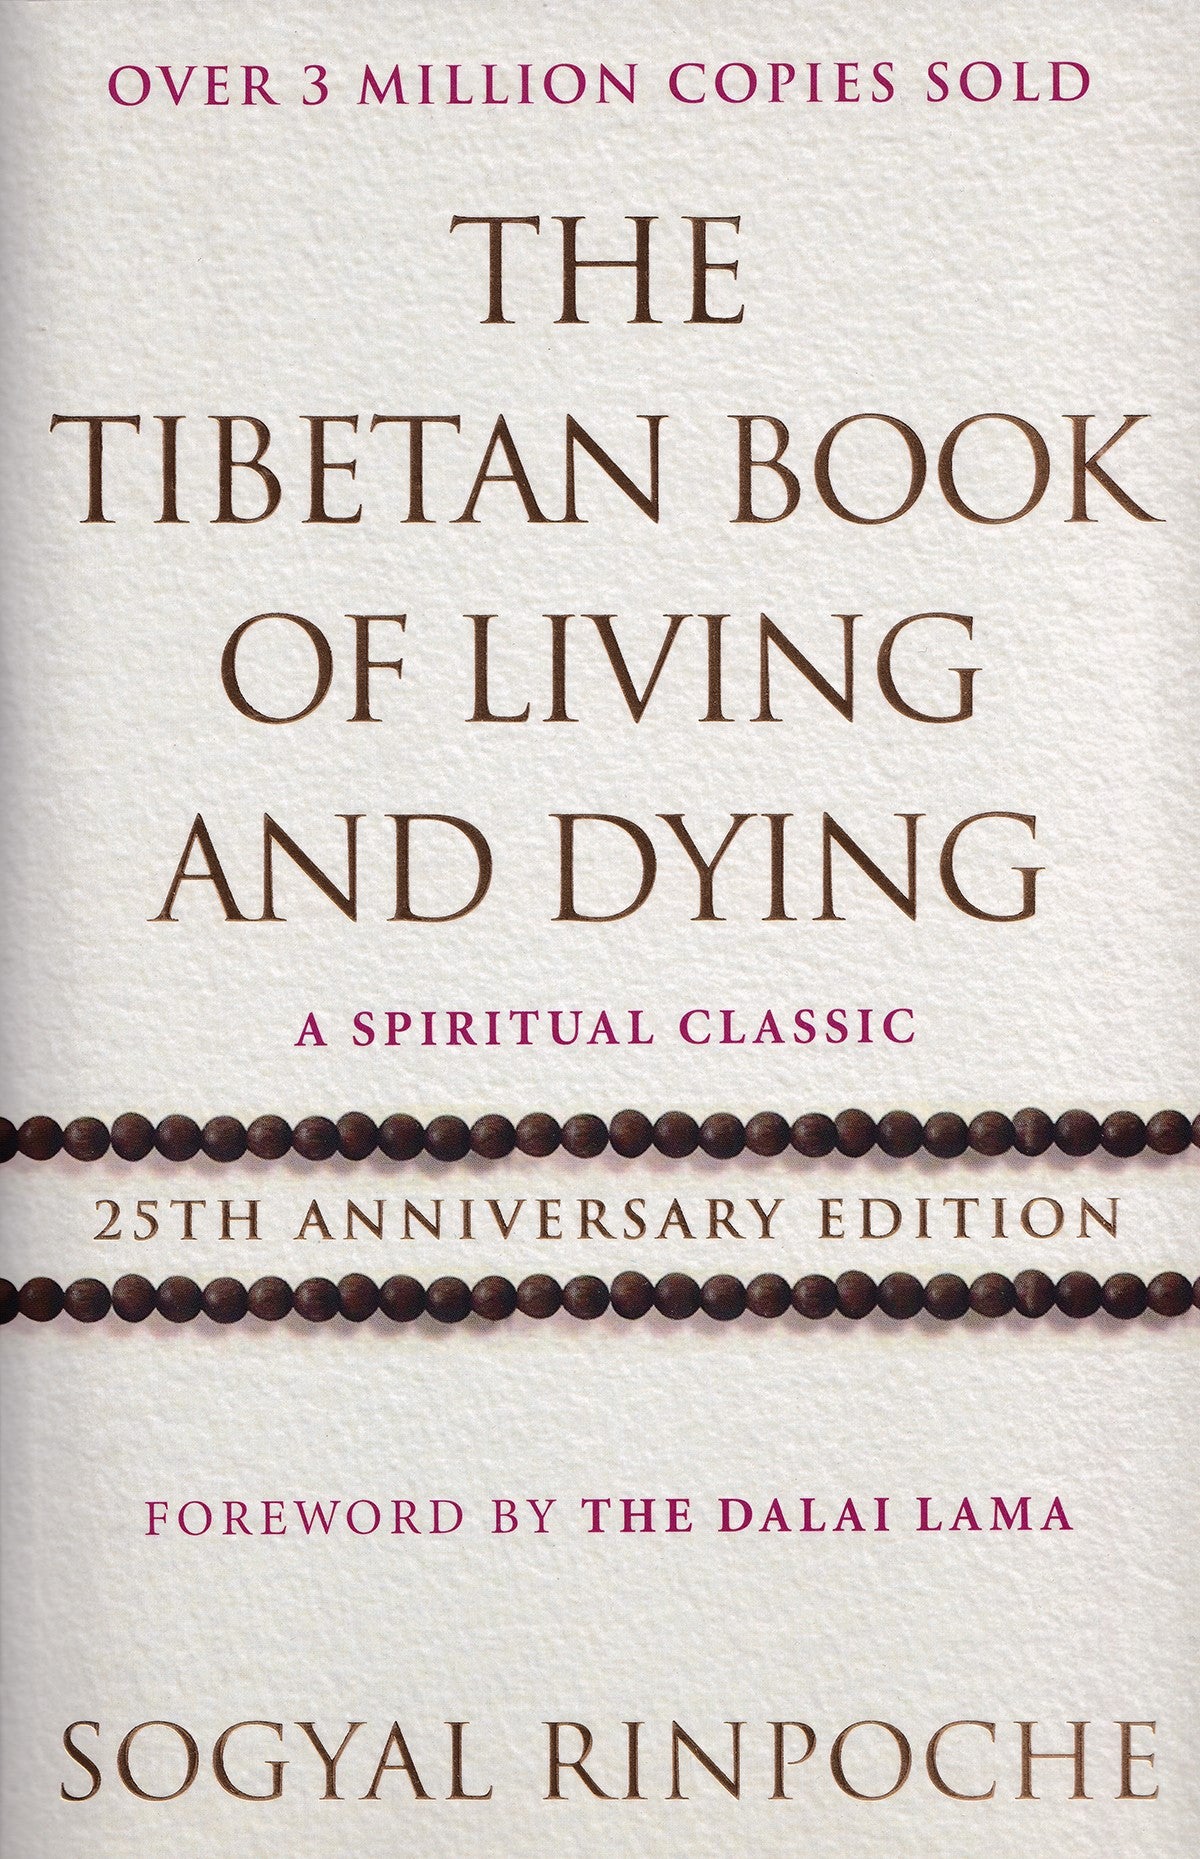 Tibetan Book of Living and Dying, The - 25th Anniversary Edition